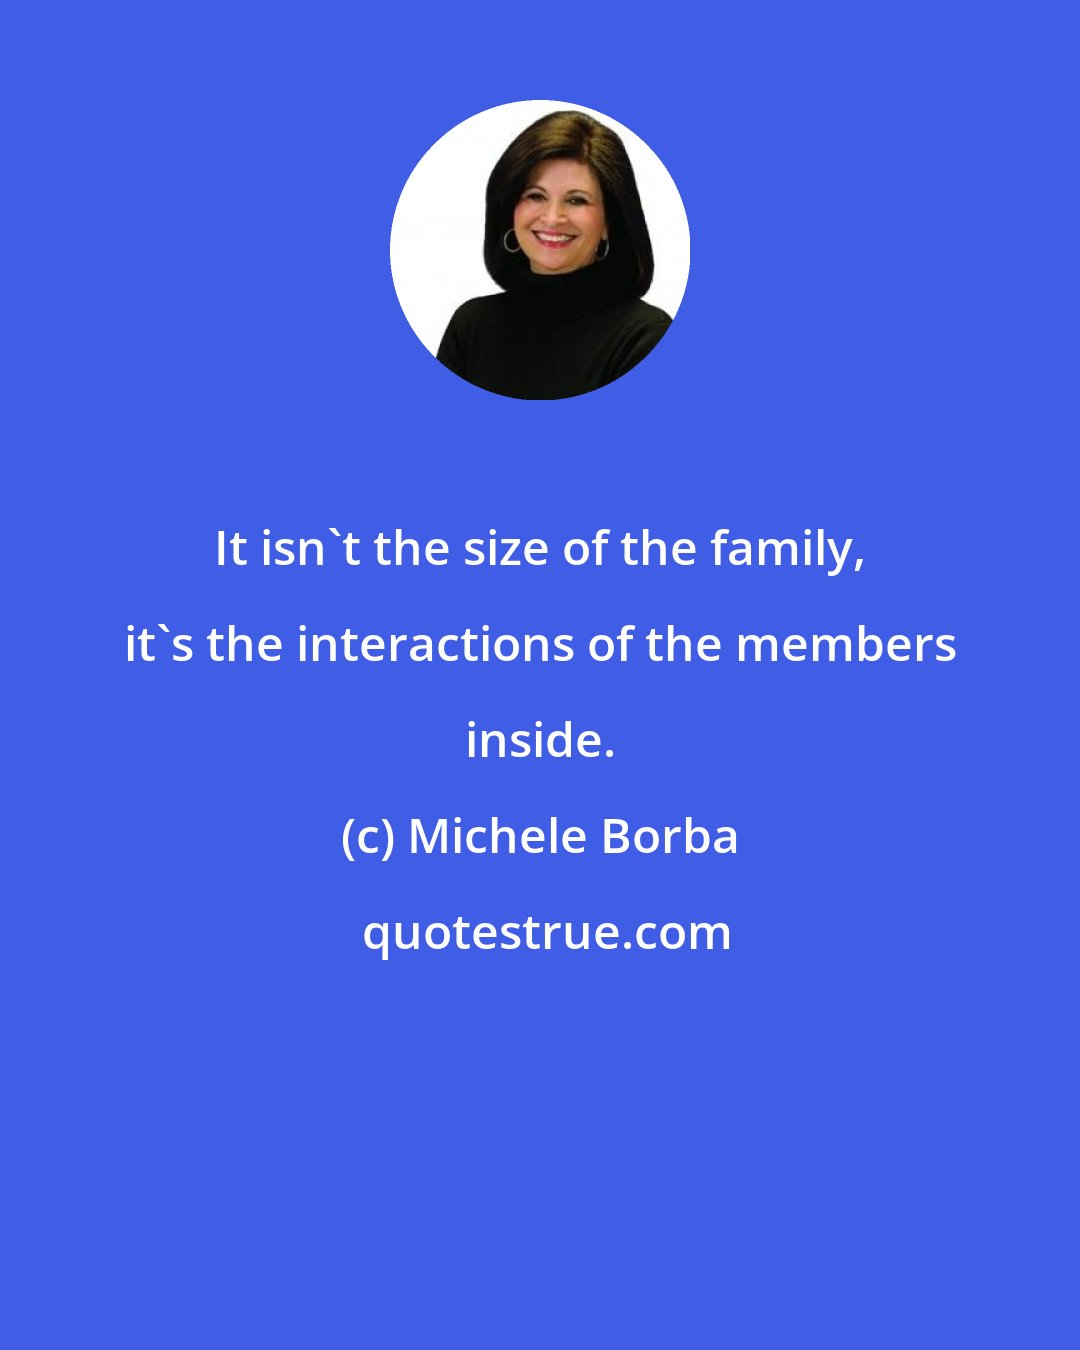 Michele Borba: It isn't the size of the family, it's the interactions of the members inside.